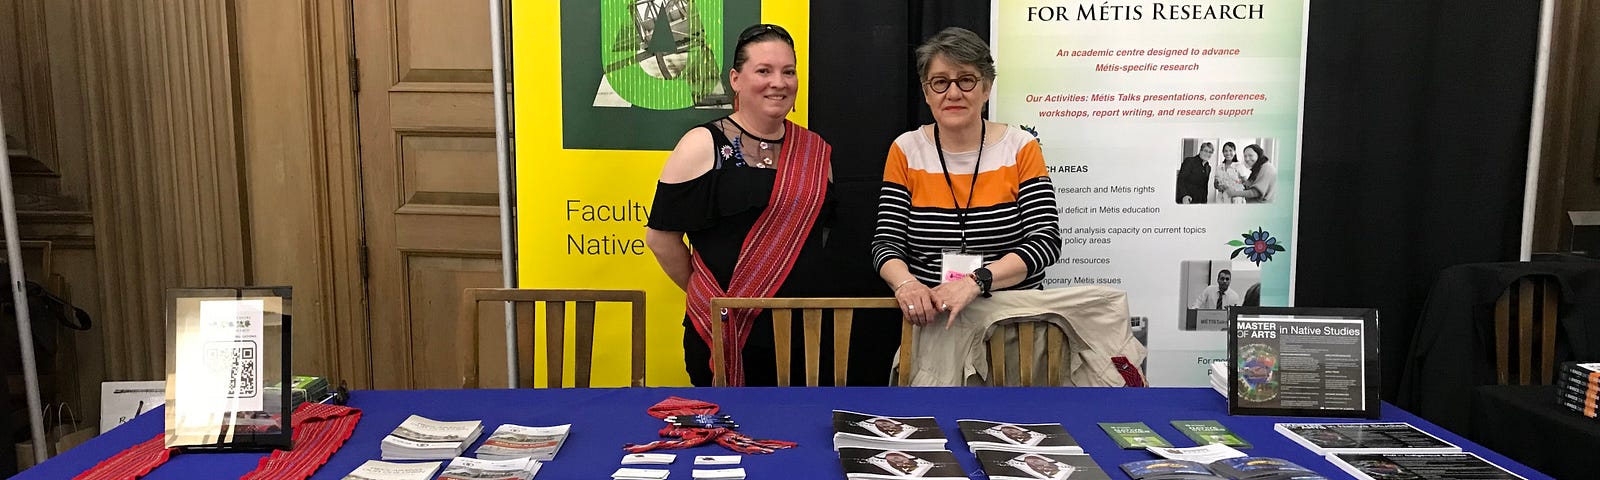 2 women, Amanda Evans and Nathalie Kermoal, stand behind a table that reads “Rupertsland Centre for Metis Research” and in front of banners for the Faculty of Native Studies and RCMR.